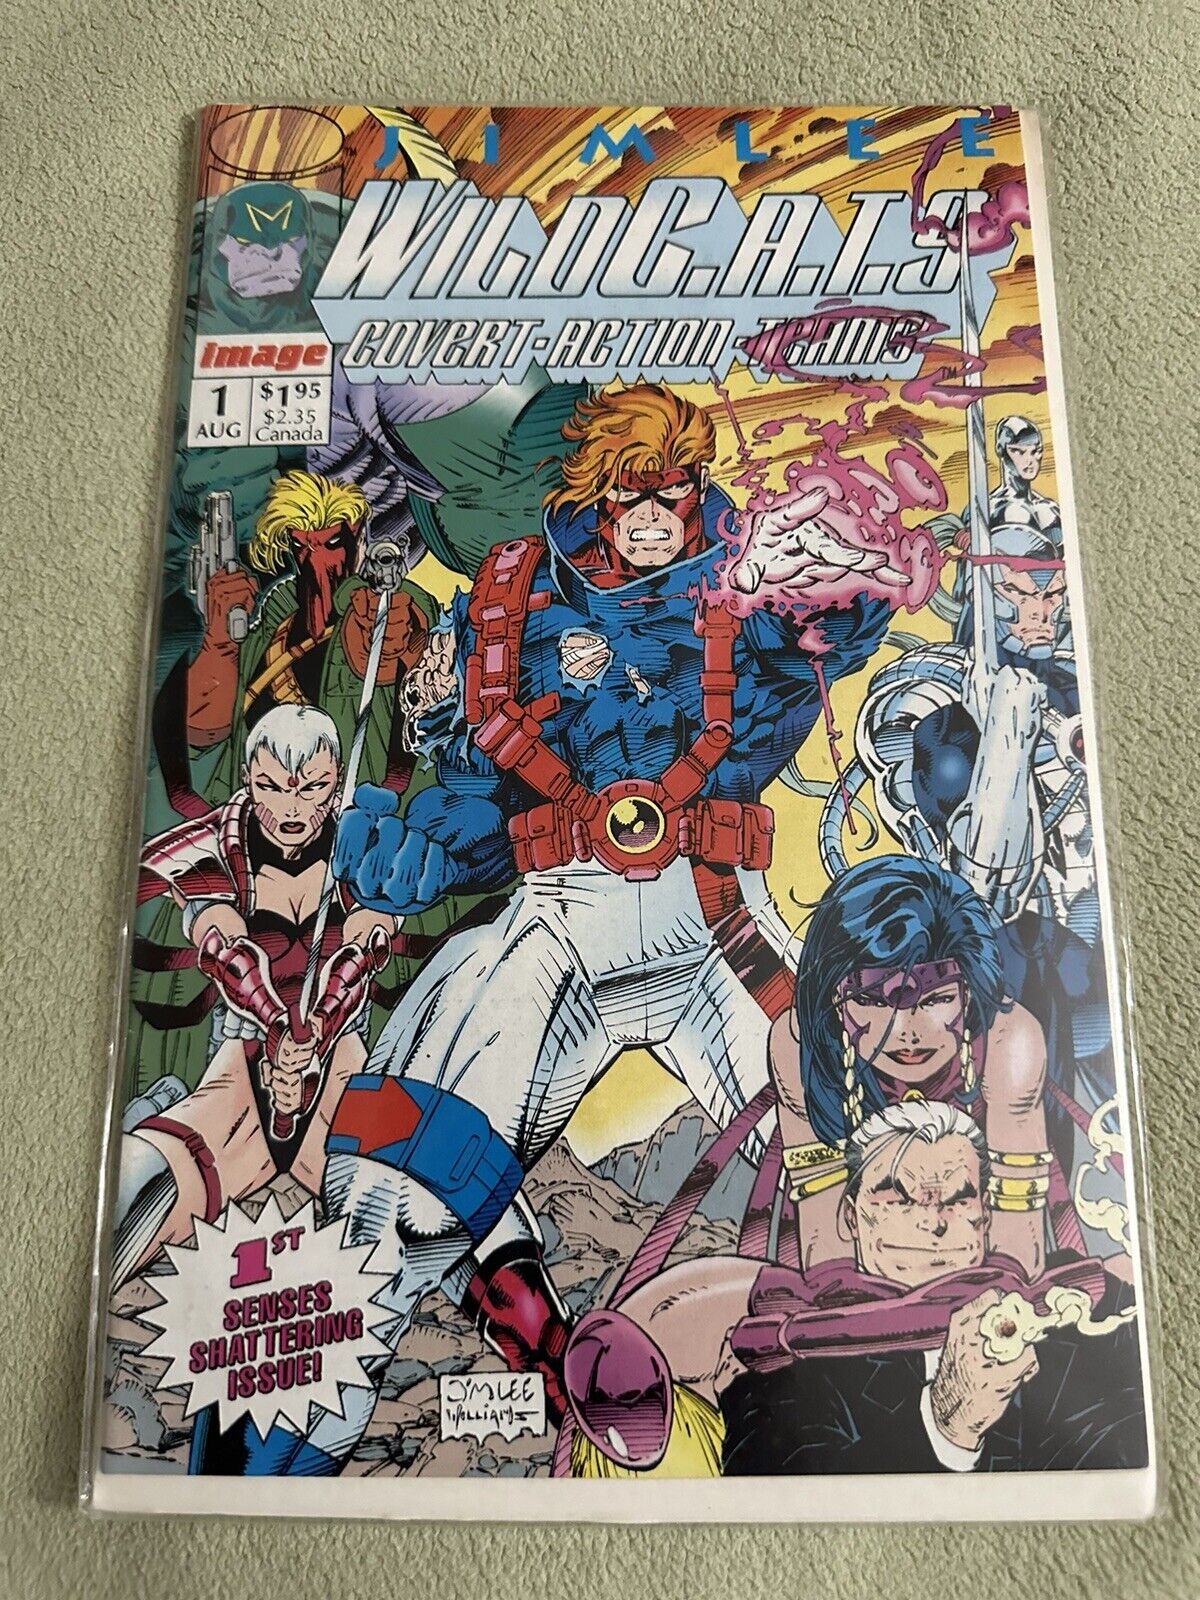 WildC.A.T.s: Covert Action Teams Comic Book #1, 1992, Jim Lee, New, Uncirculated